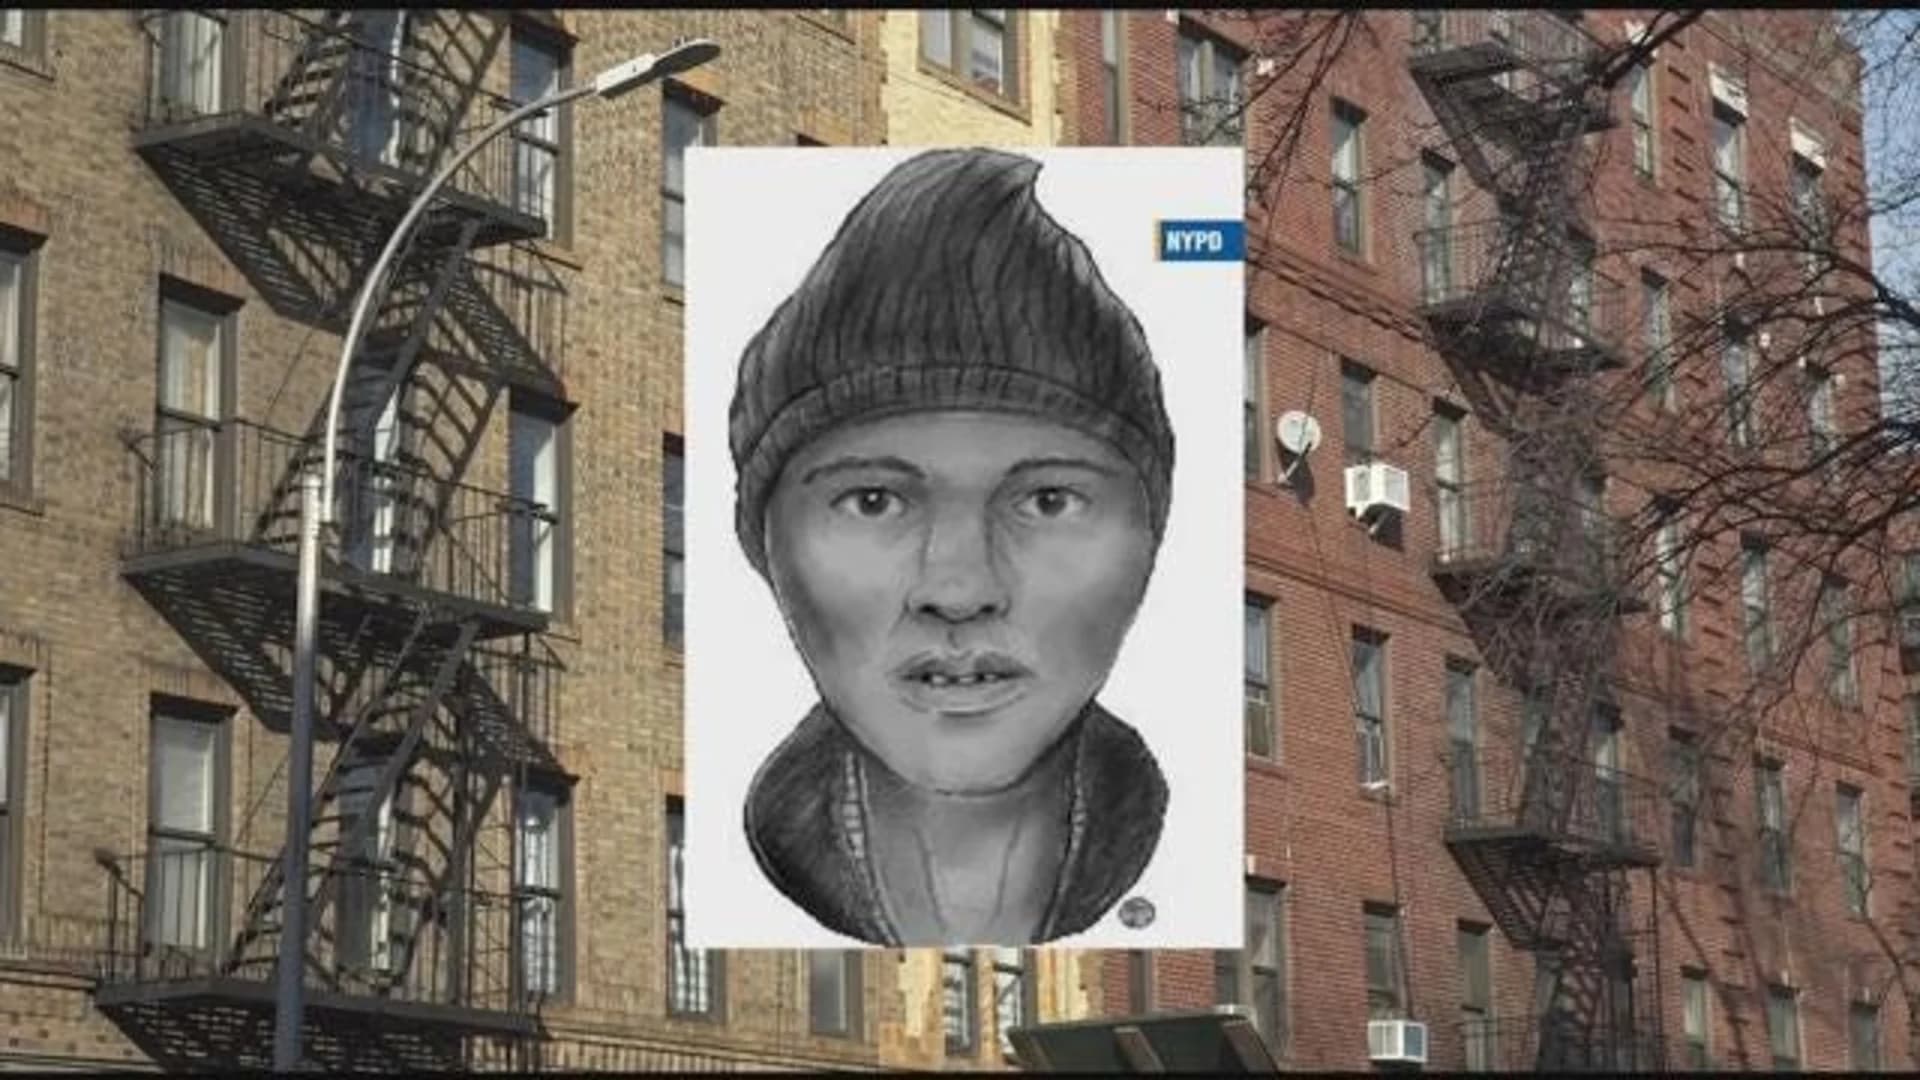 Police release sketch of suspect wanted in sexual assault